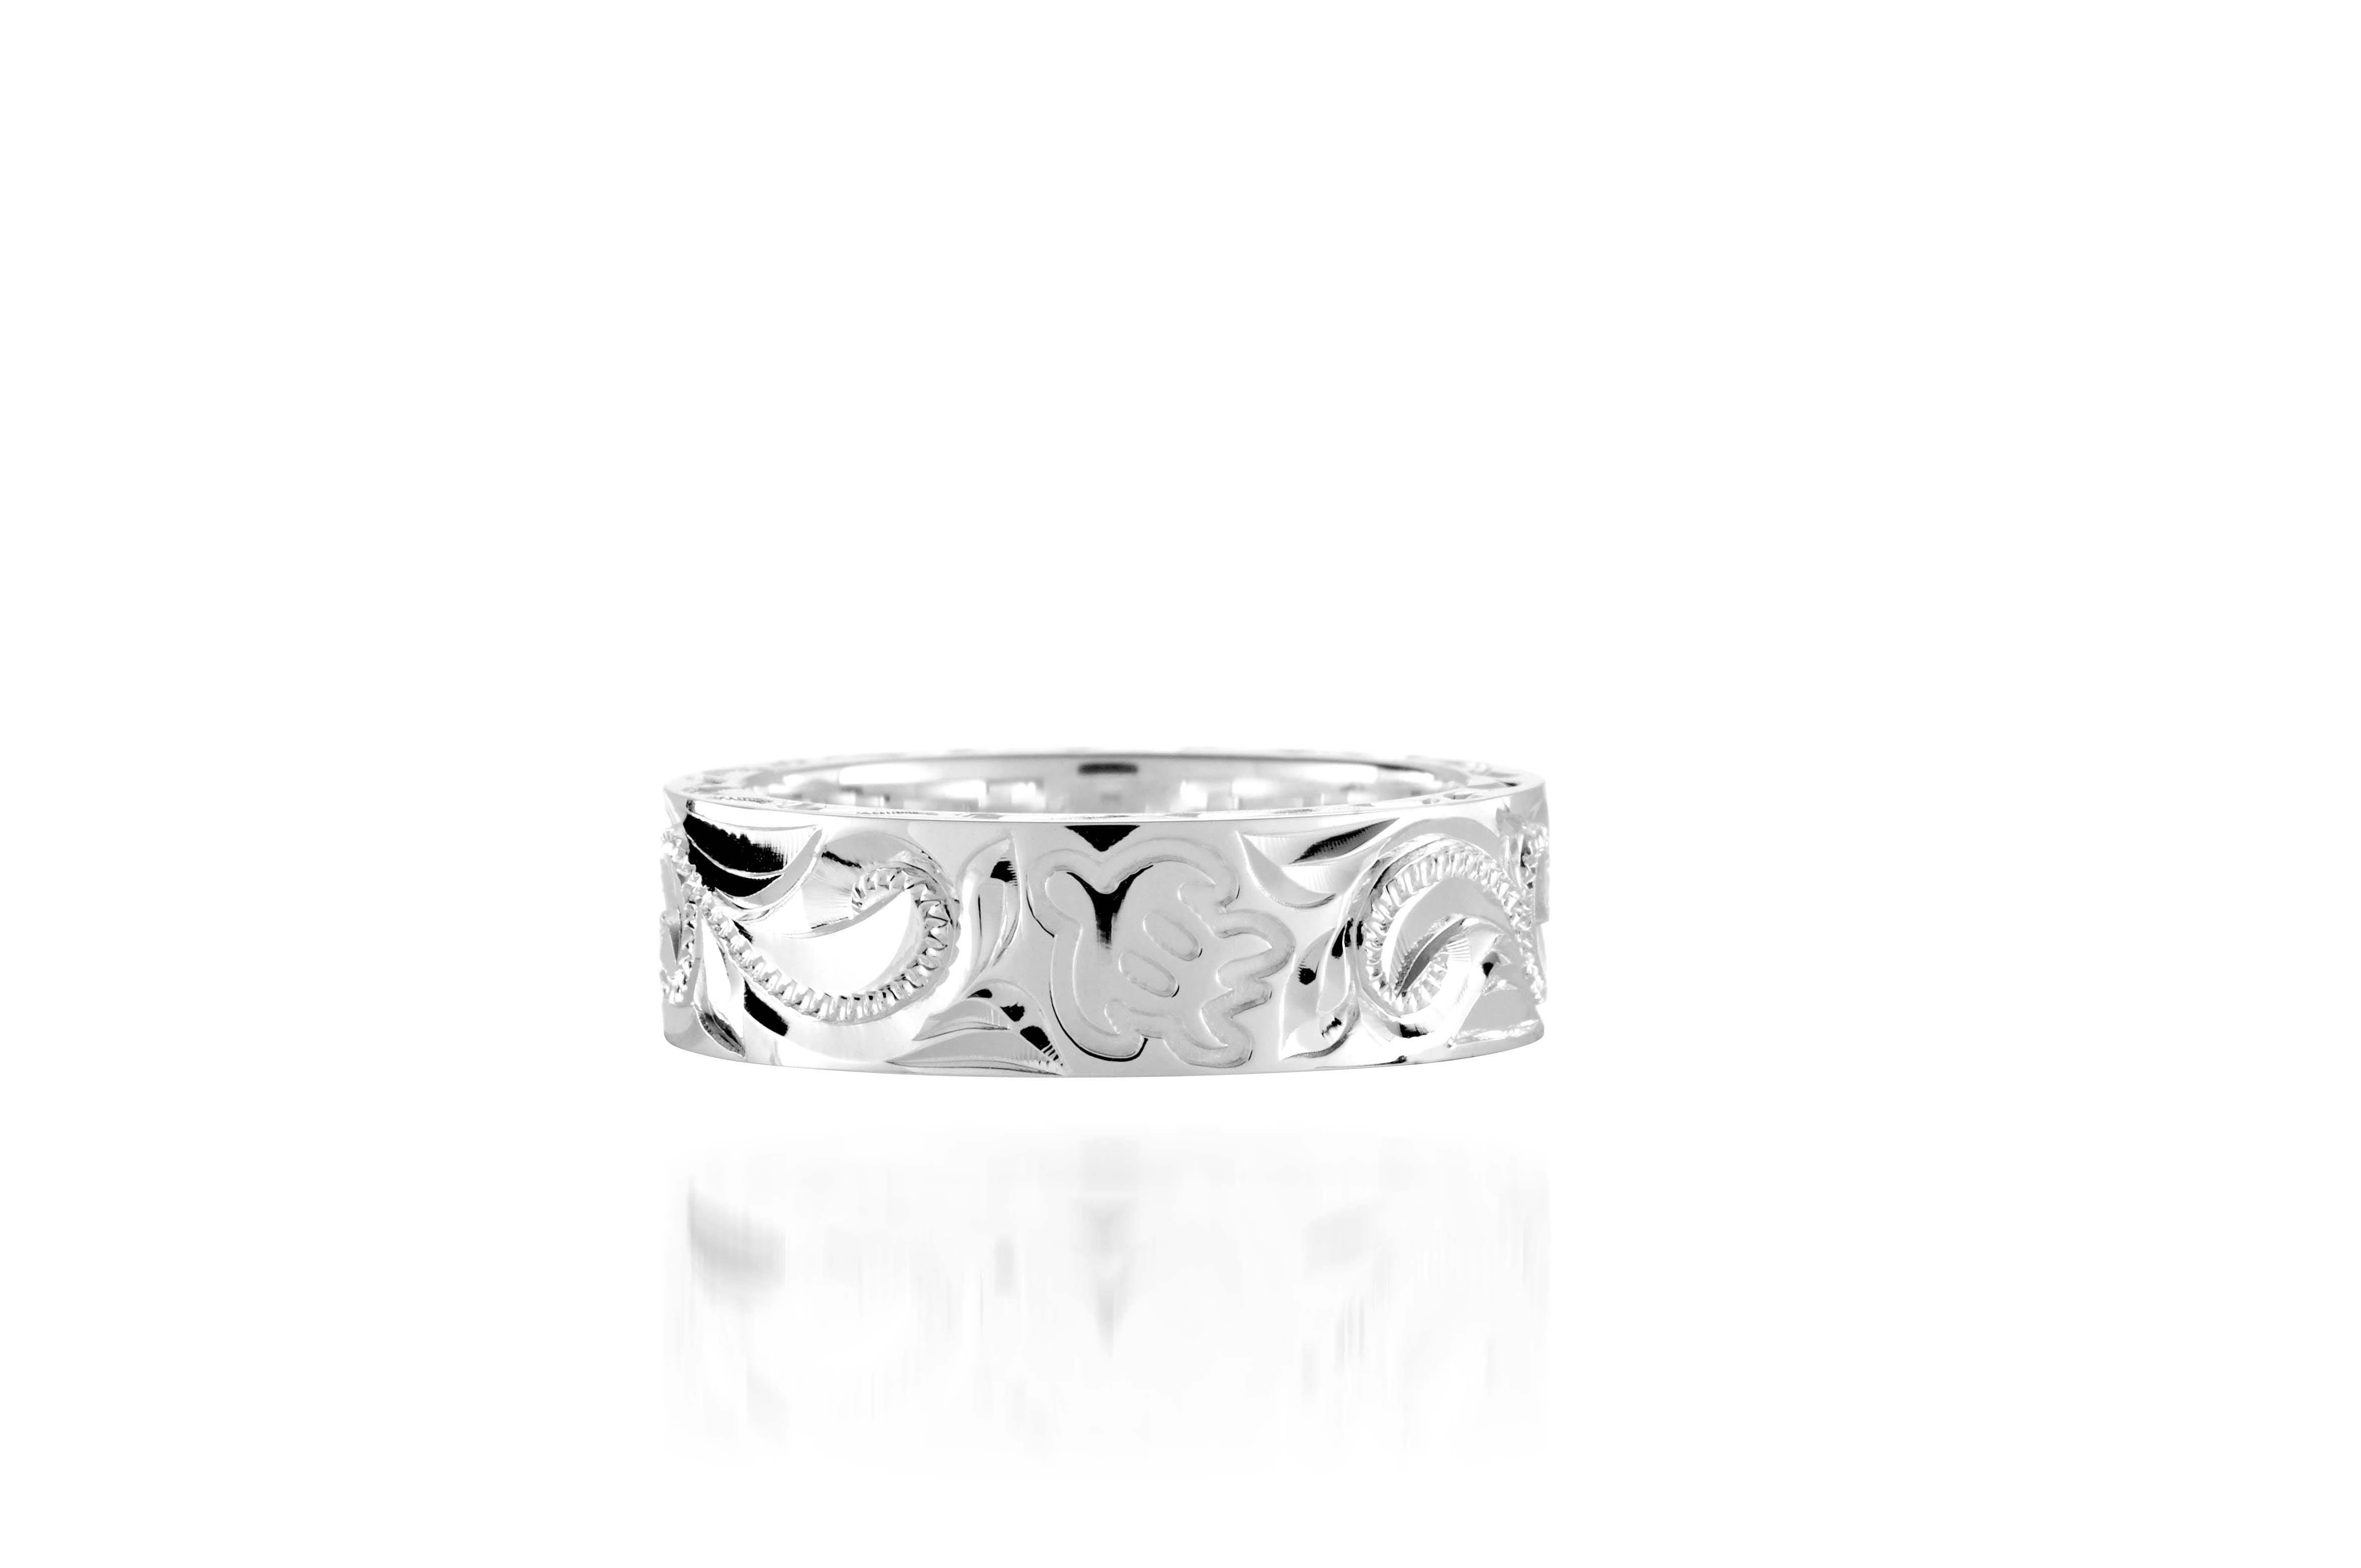 The picture shows a 925 sterling silver 6mm ring with hand engravings including sea turtles.